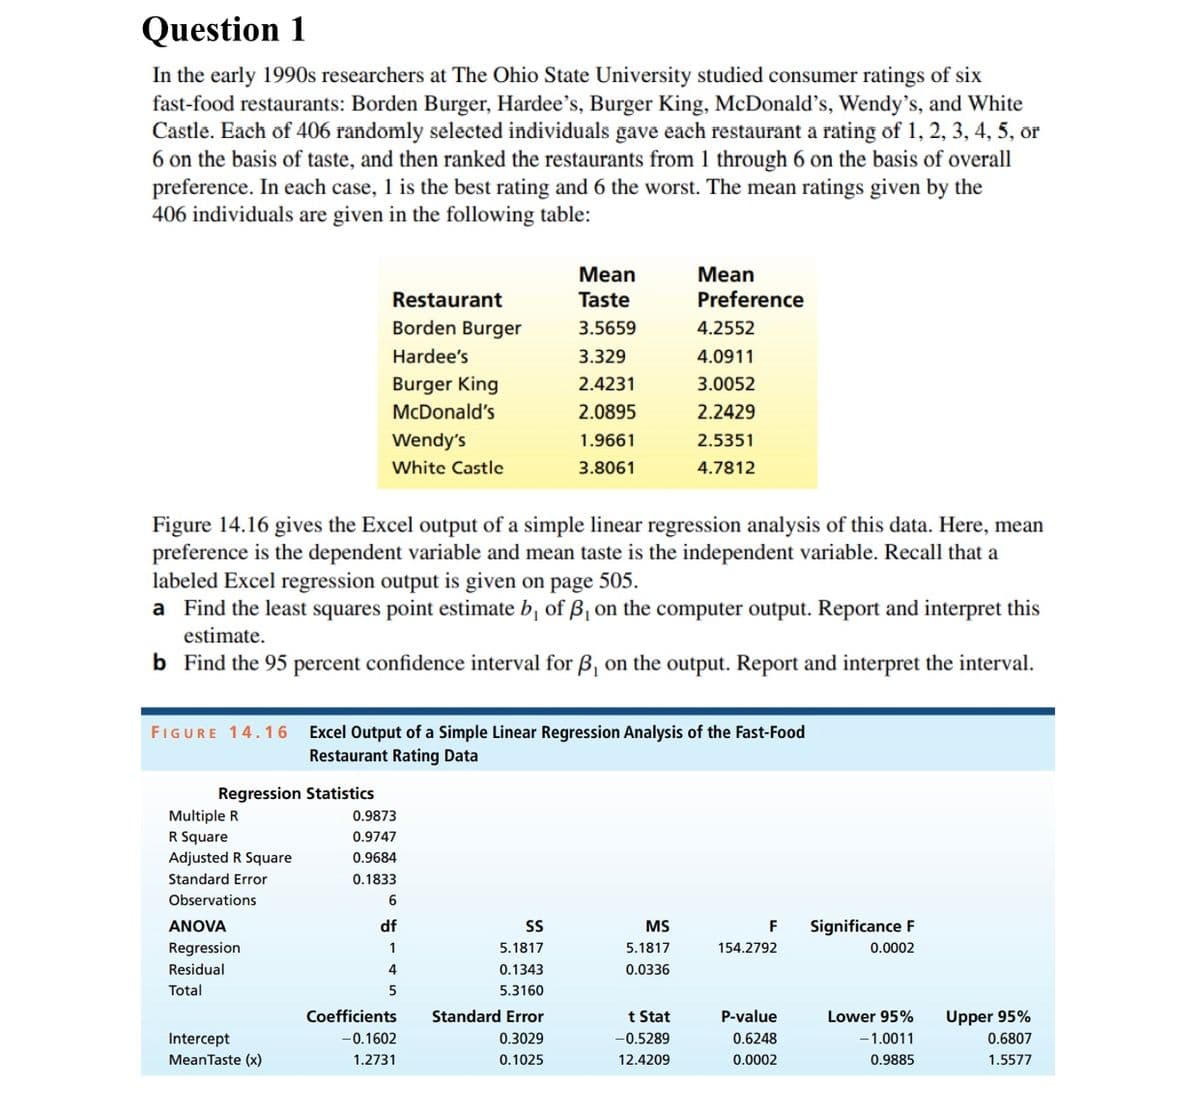 Question 1
In the early 1990s researchers at The Ohio State University studied consumer ratings of six
fast-food restaurants: Borden Burger, Hardee's, Burger King, McDonald's, Wendy's, and White
Castle. Each of 406 randomly selected individuals gave each restaurant a rating of 1, 2, 3, 4, 5, or
6 on the basis of taste, and then ranked the restaurants from 1 through 6 on the basis of overall
preference. In each case, 1 is the best rating and 6 the worst. The mean ratings given by the
406 individuals are given in the following table:
Mean
Mean
Taste
Restaurant
Preference
Borden Burger
3.5659
4.2552
Hardee's
3.329
4.0911
Burger King
2.4231
3.0052
McDonald's
2.0895
2.2429
Wendy's
1.9661
2.5351
White Castle
3.8061
4.7812
Figure 14.16 gives the Excel output of a simple linear regression analysis of this data. Here, mean
preference is the dependent variable and mean taste is the independent variable. Recall that a
labeled Excel regression output is given on page 505.
a Find the least squares point estimate b, of ß, on the computer output. Report and interpret this
estimate.
b Find the 95 percent confidence interval for B, on the output. Report and interpret the interval.
FIGURE 14.16
Excel Output of a Simple Linear Regression Analysis of the Fast-Food
Restaurant Rating Data
Multiple R
0.9873
R Square
0.9747
Adjusted R Square
0.9684
Standard Error
0.1833
Observations
6
ANOVA
df
SS
F
Significance F
MS
5.1817
Regression
1
5.1817
154.2792
0.0002
Residual
4
0.1343
0.0336
Total
5
5.3160
Coefficients Standard Error
t Stat
P-value
Lower 95%
Intercept
-0.1602
0.3029
-0.5289
0.6248
-1.0011
MeanTaste (x)
1.2731
0.1025
12.4209
0.0002
0.9885
Regression Statistics
Upper 95%
0.6807
1.5577